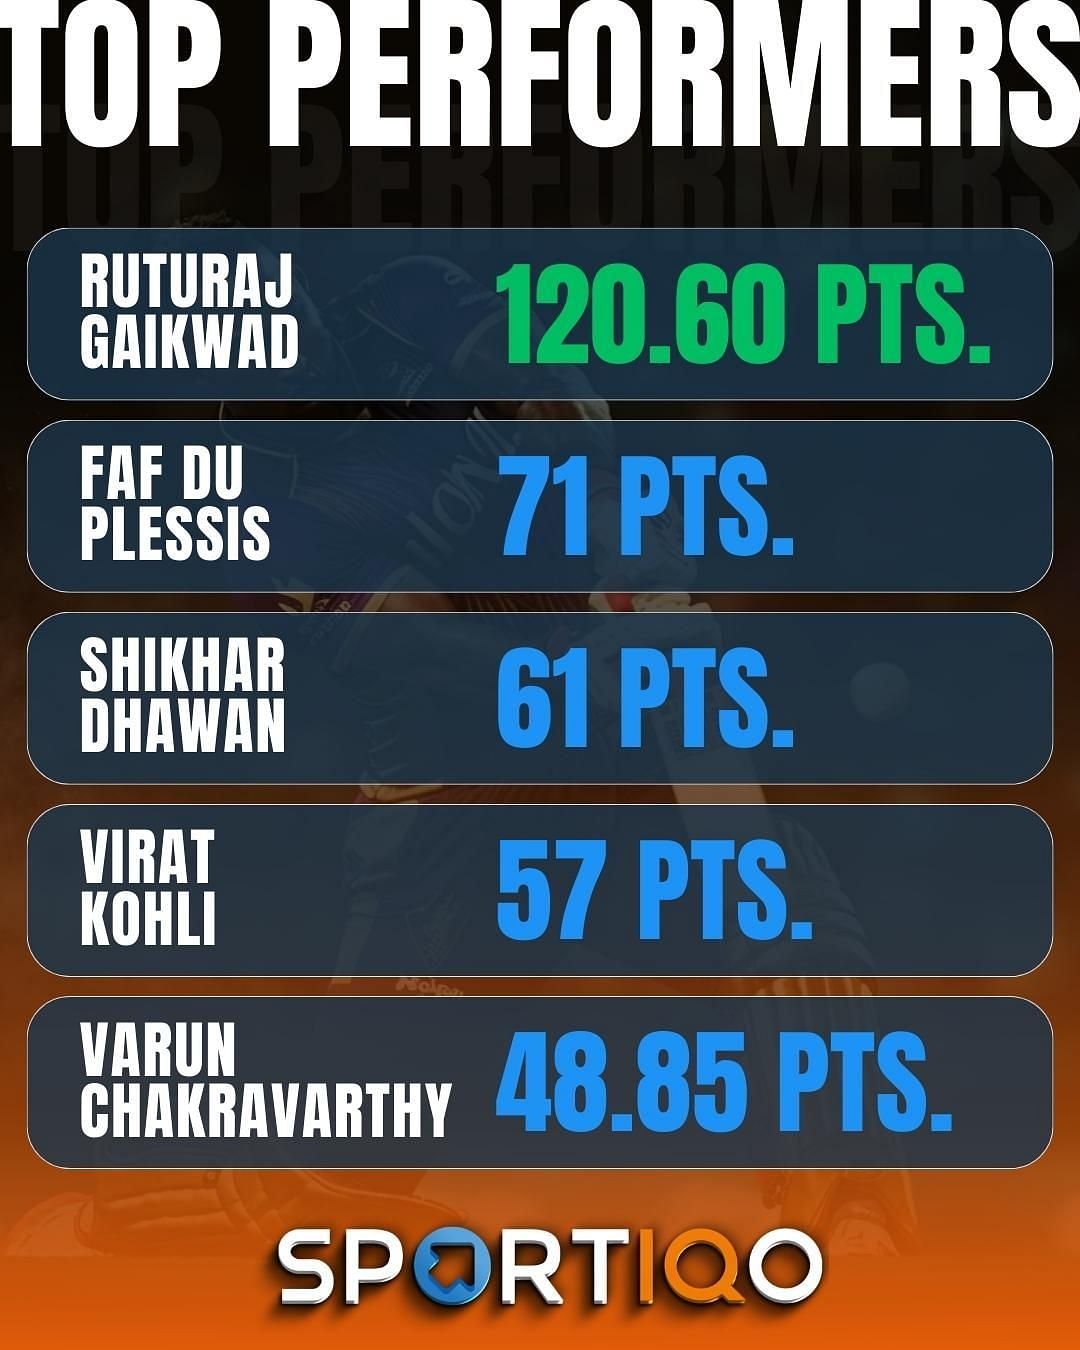 KKR&#039;s Varun Chakaravarthy is the only bowler among the top performers of Week 1